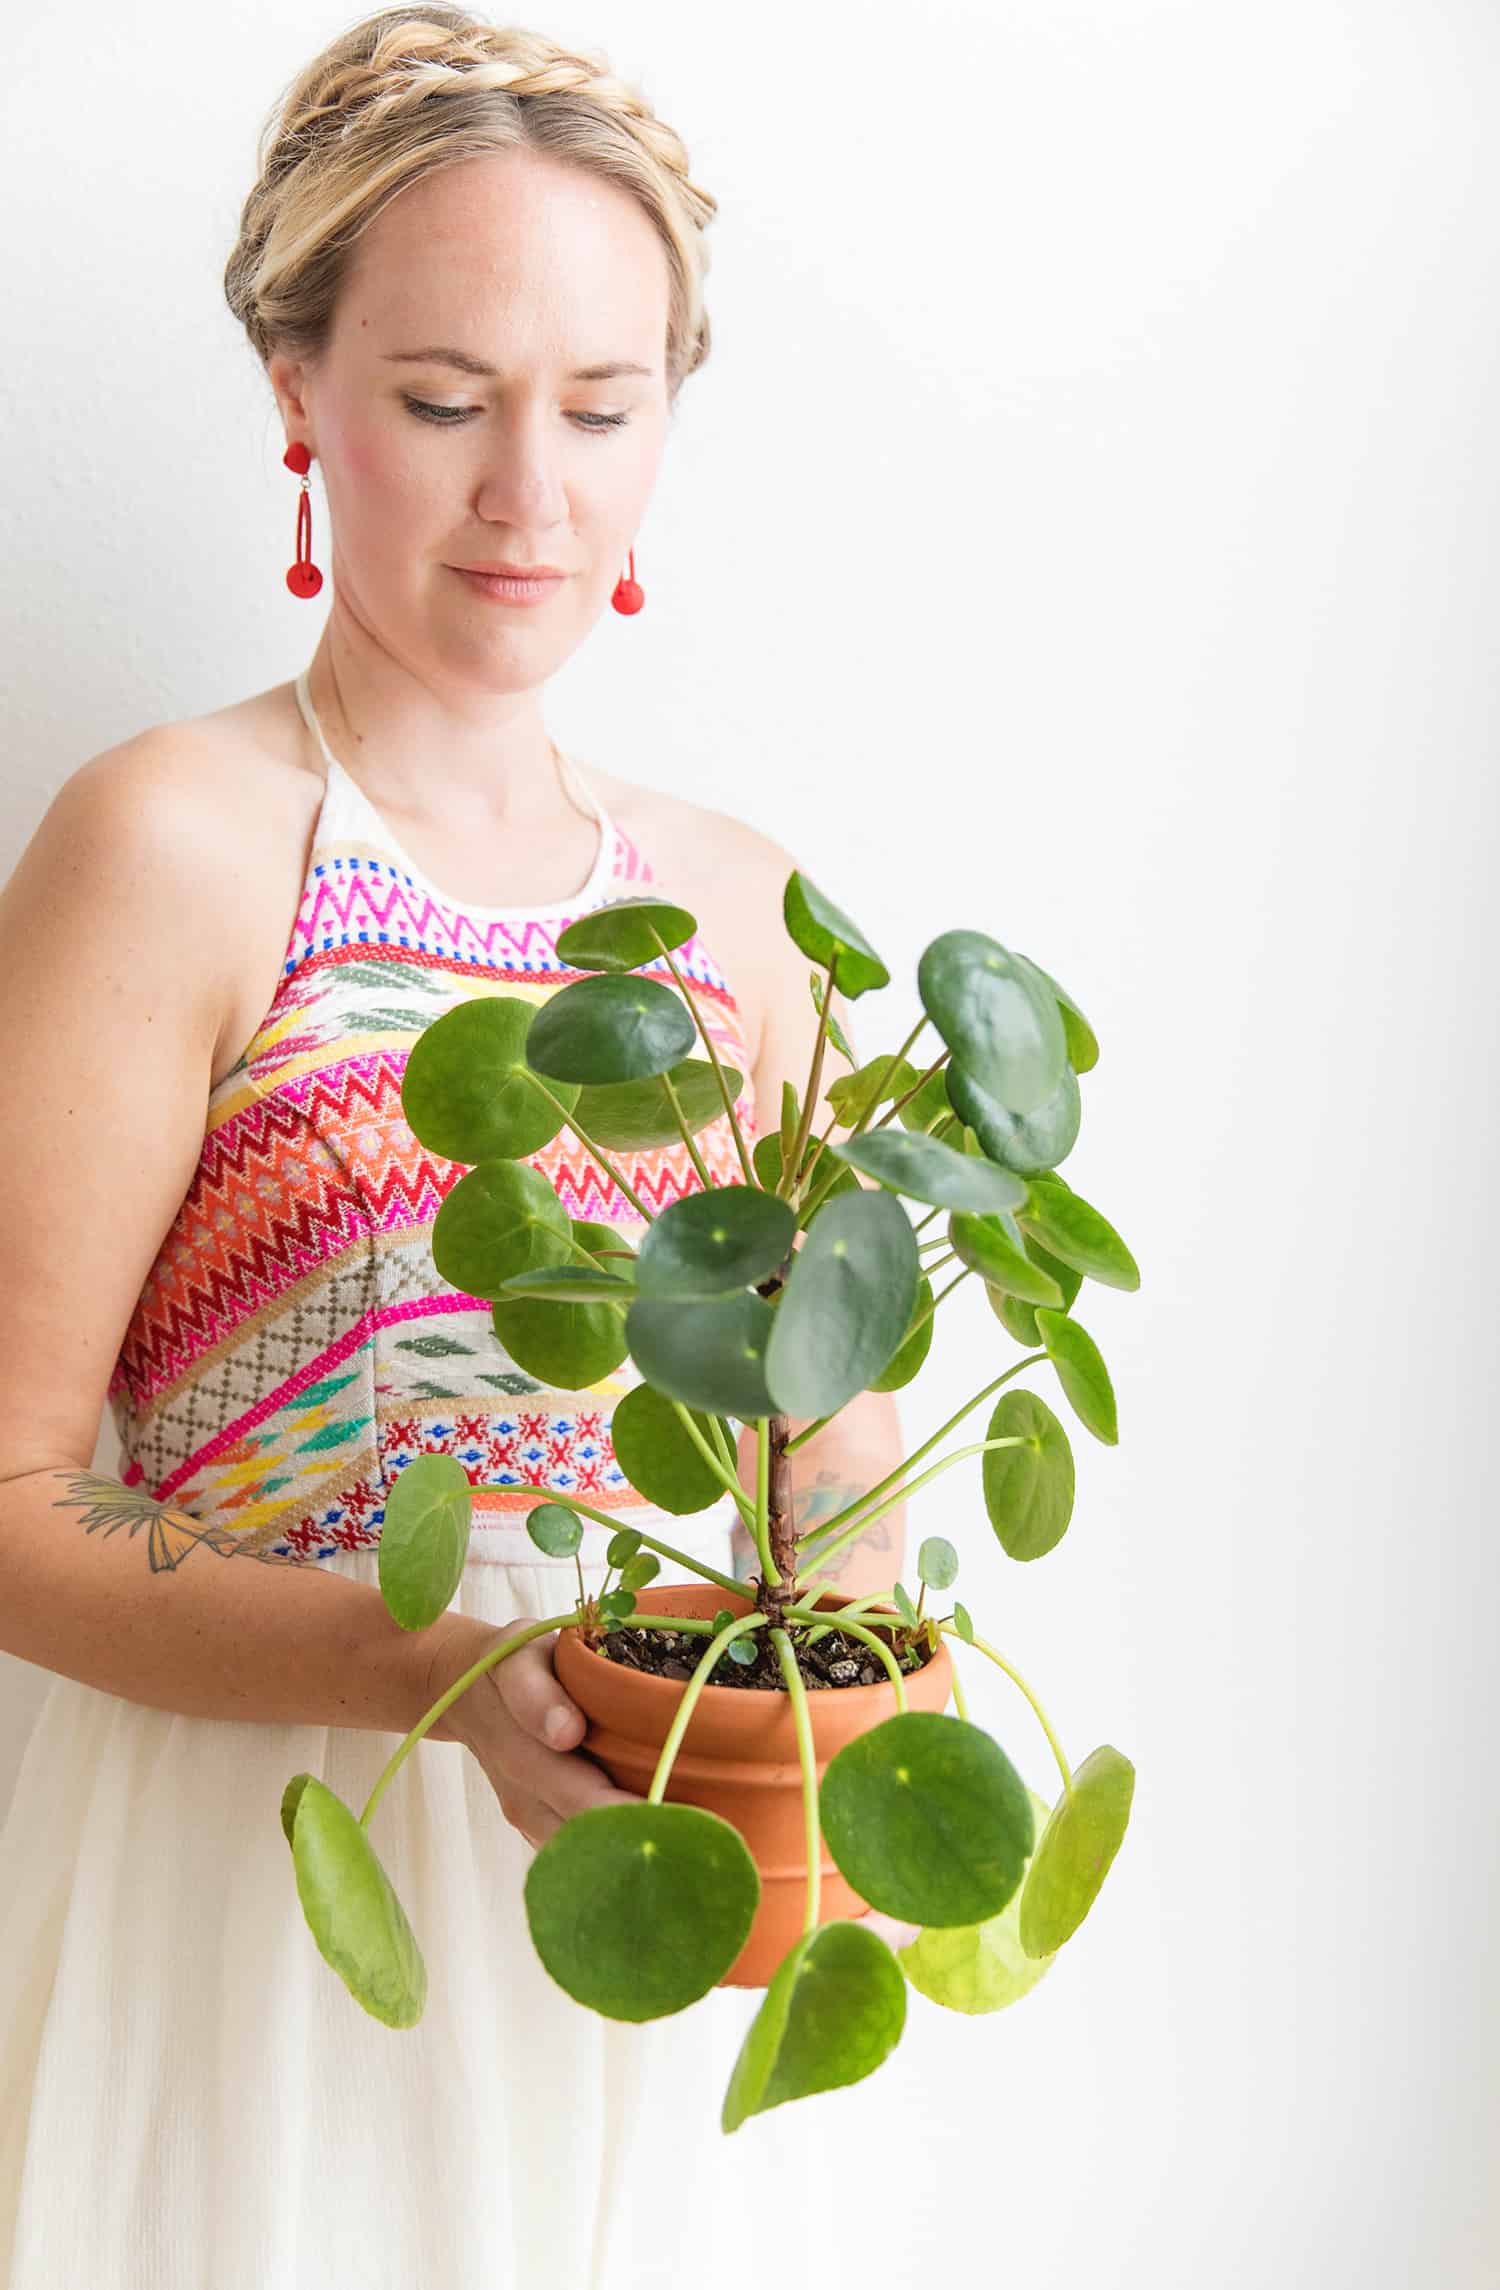 Emma holding a potted plant